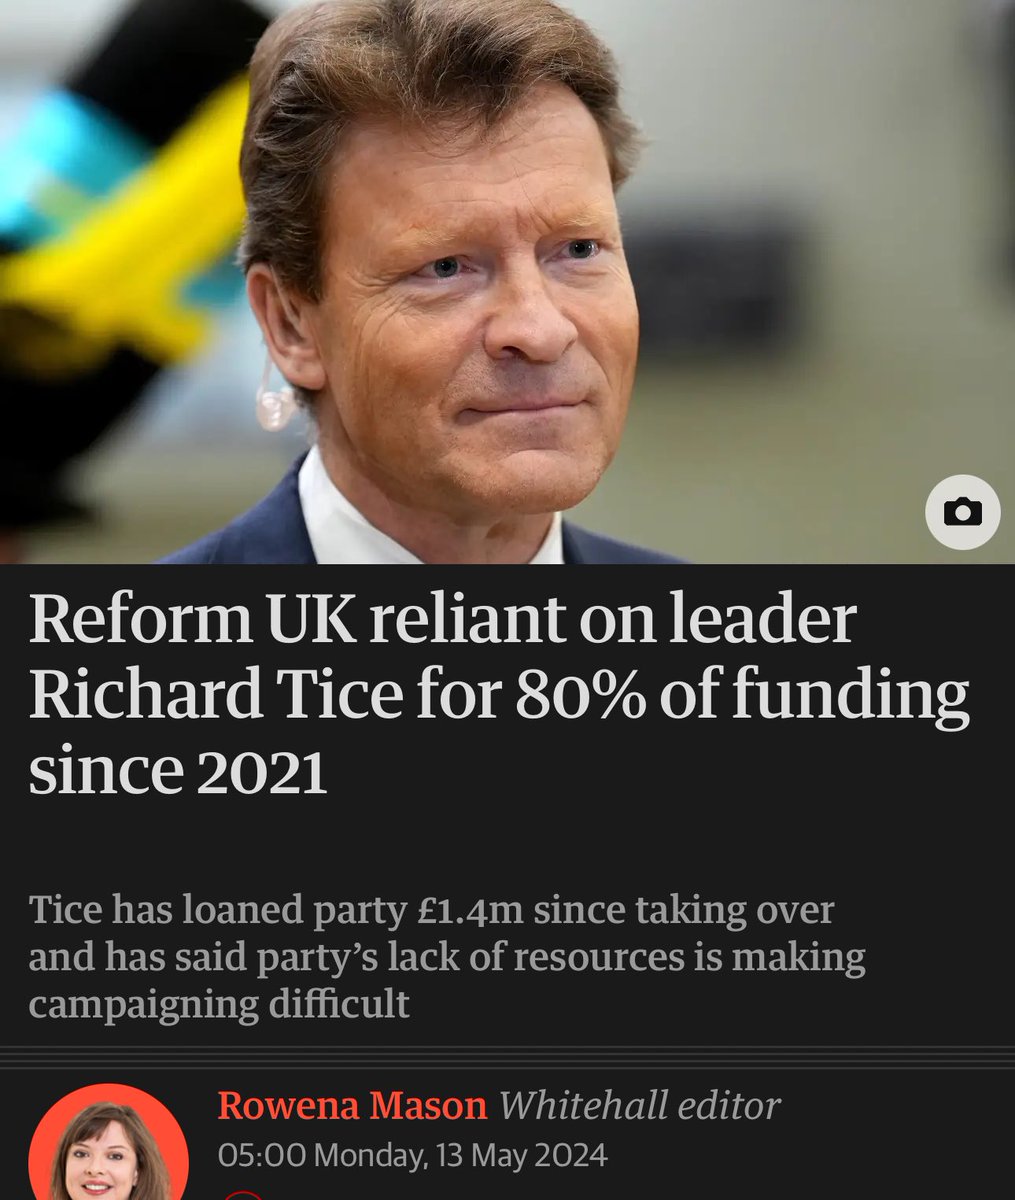 Is this how Reform Party will climb down before the election this time? Insufficient funding for far right ideology.